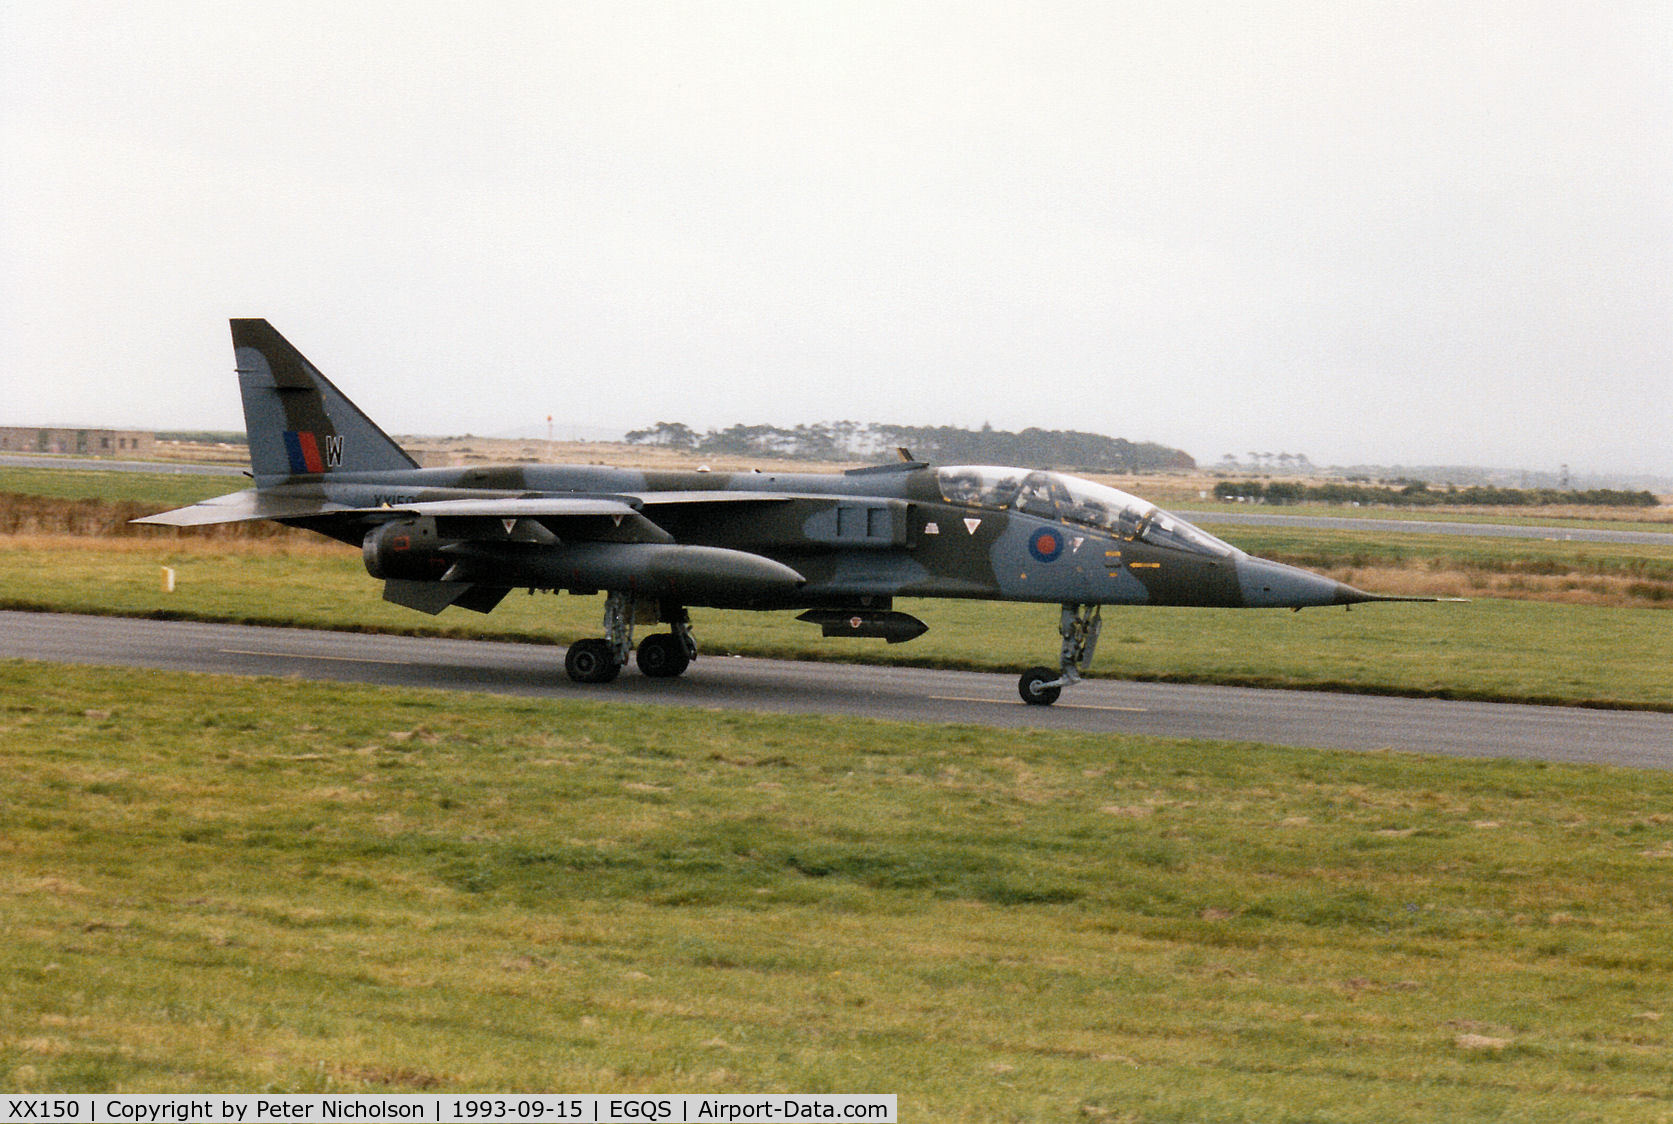 XX150, 1974 Sepecat Jaguar T.2A C/N B.15, Jaguar T.2A of 16[Reserve] Squadron taxying to Runway 05 at RAF Lossiemouth in September 1993.